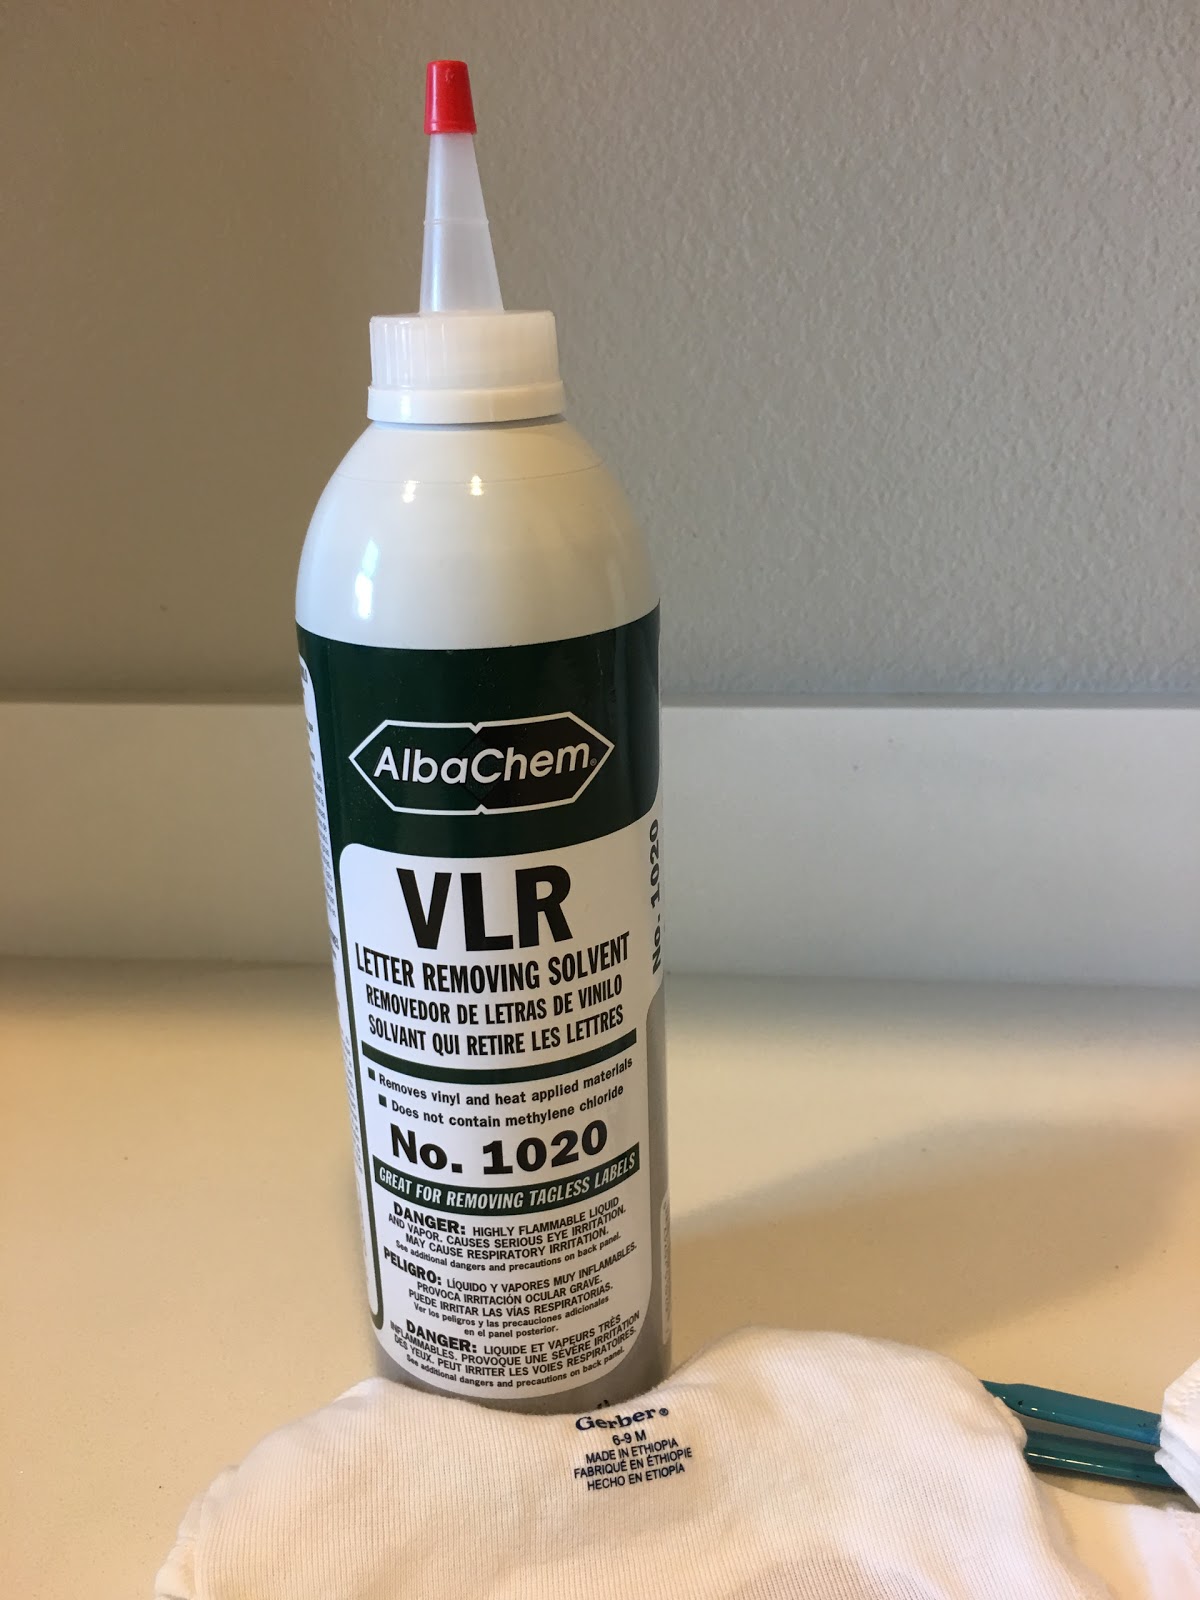 Heat Transfer Vinyl Remover for Lights and Darks: Review - Silhouette School